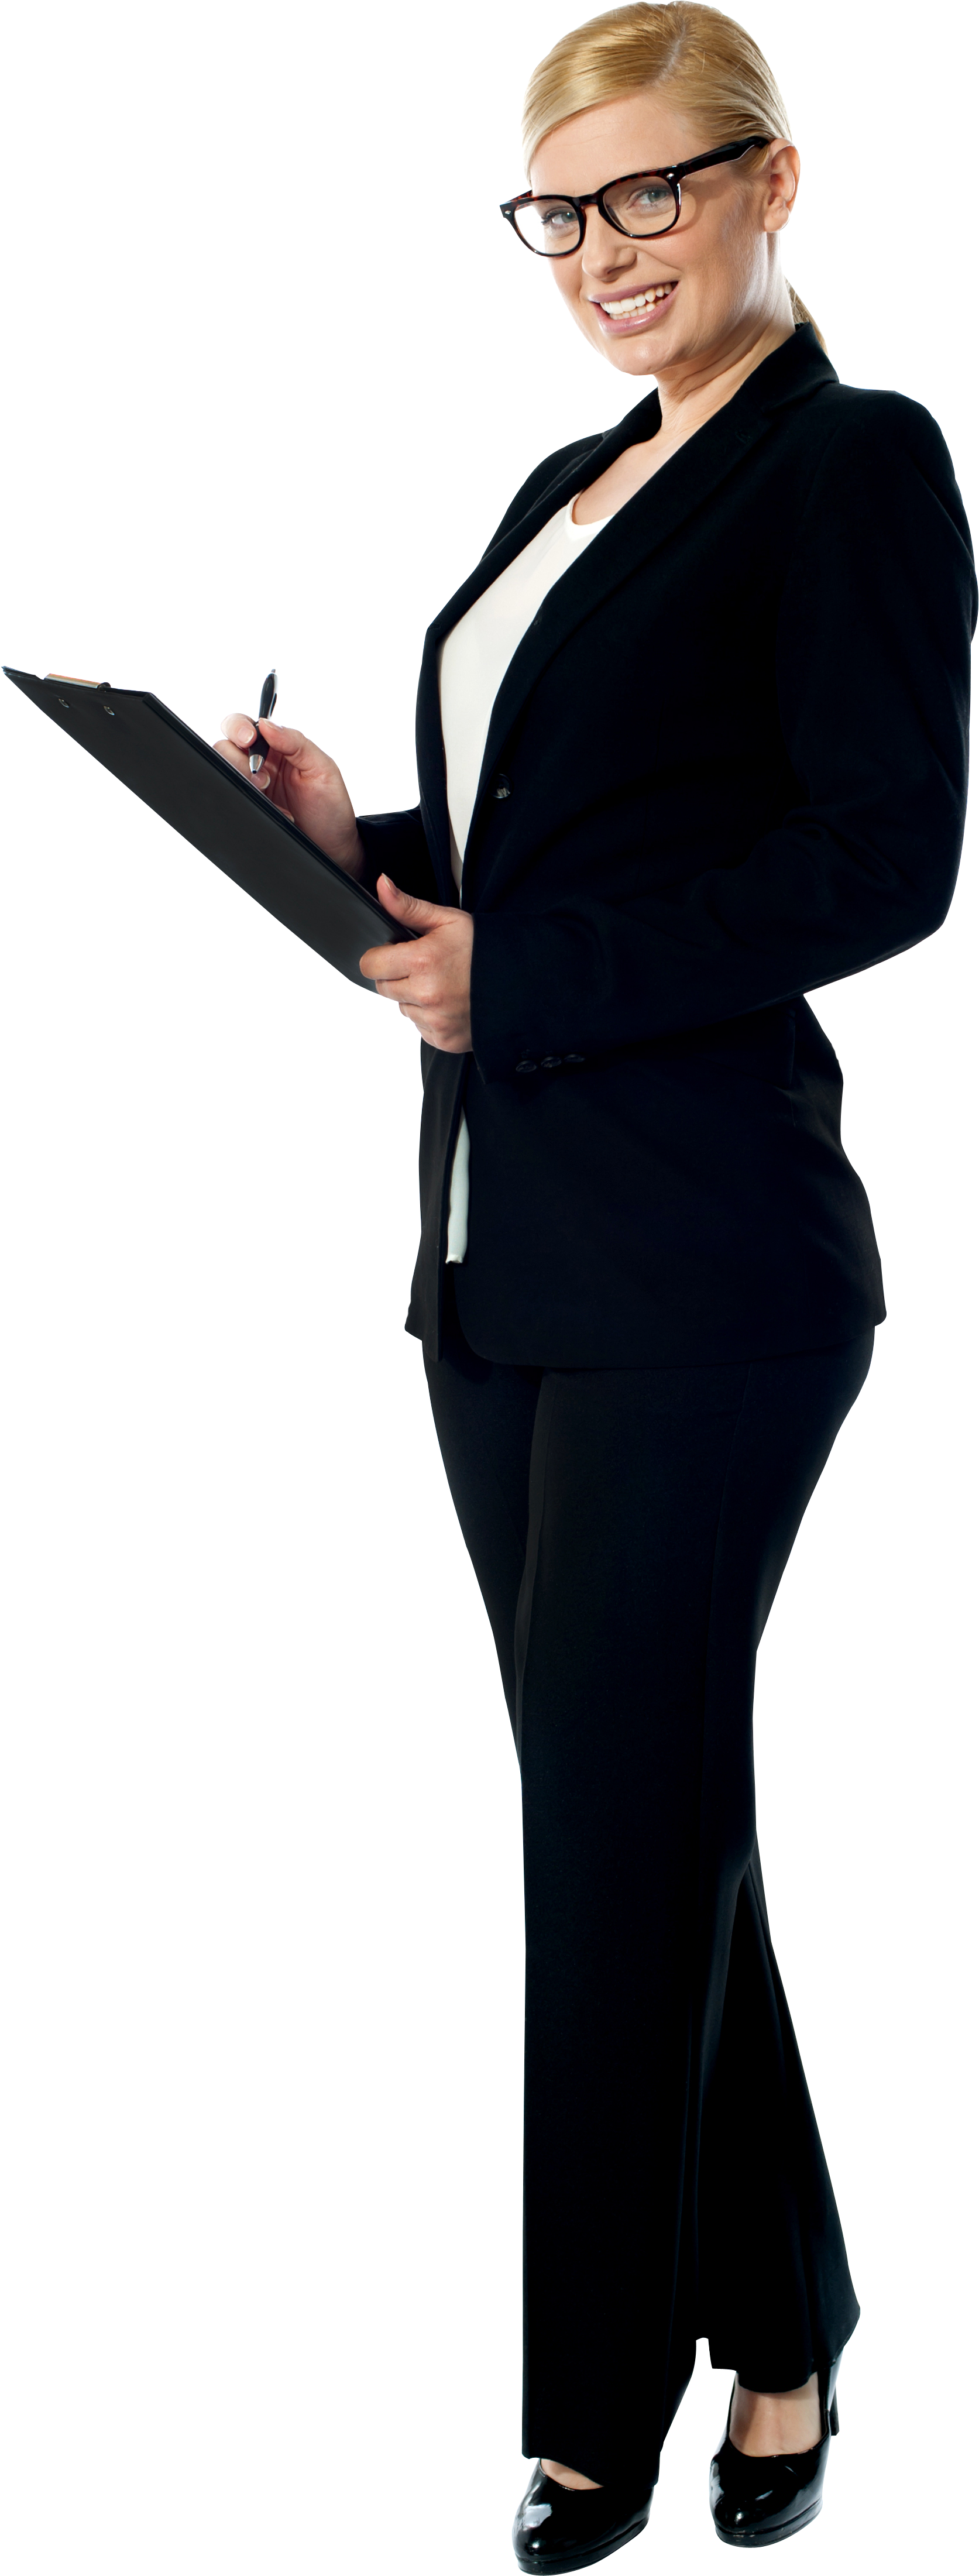 Professional Woman Business PNG Image High Quality PNG Image